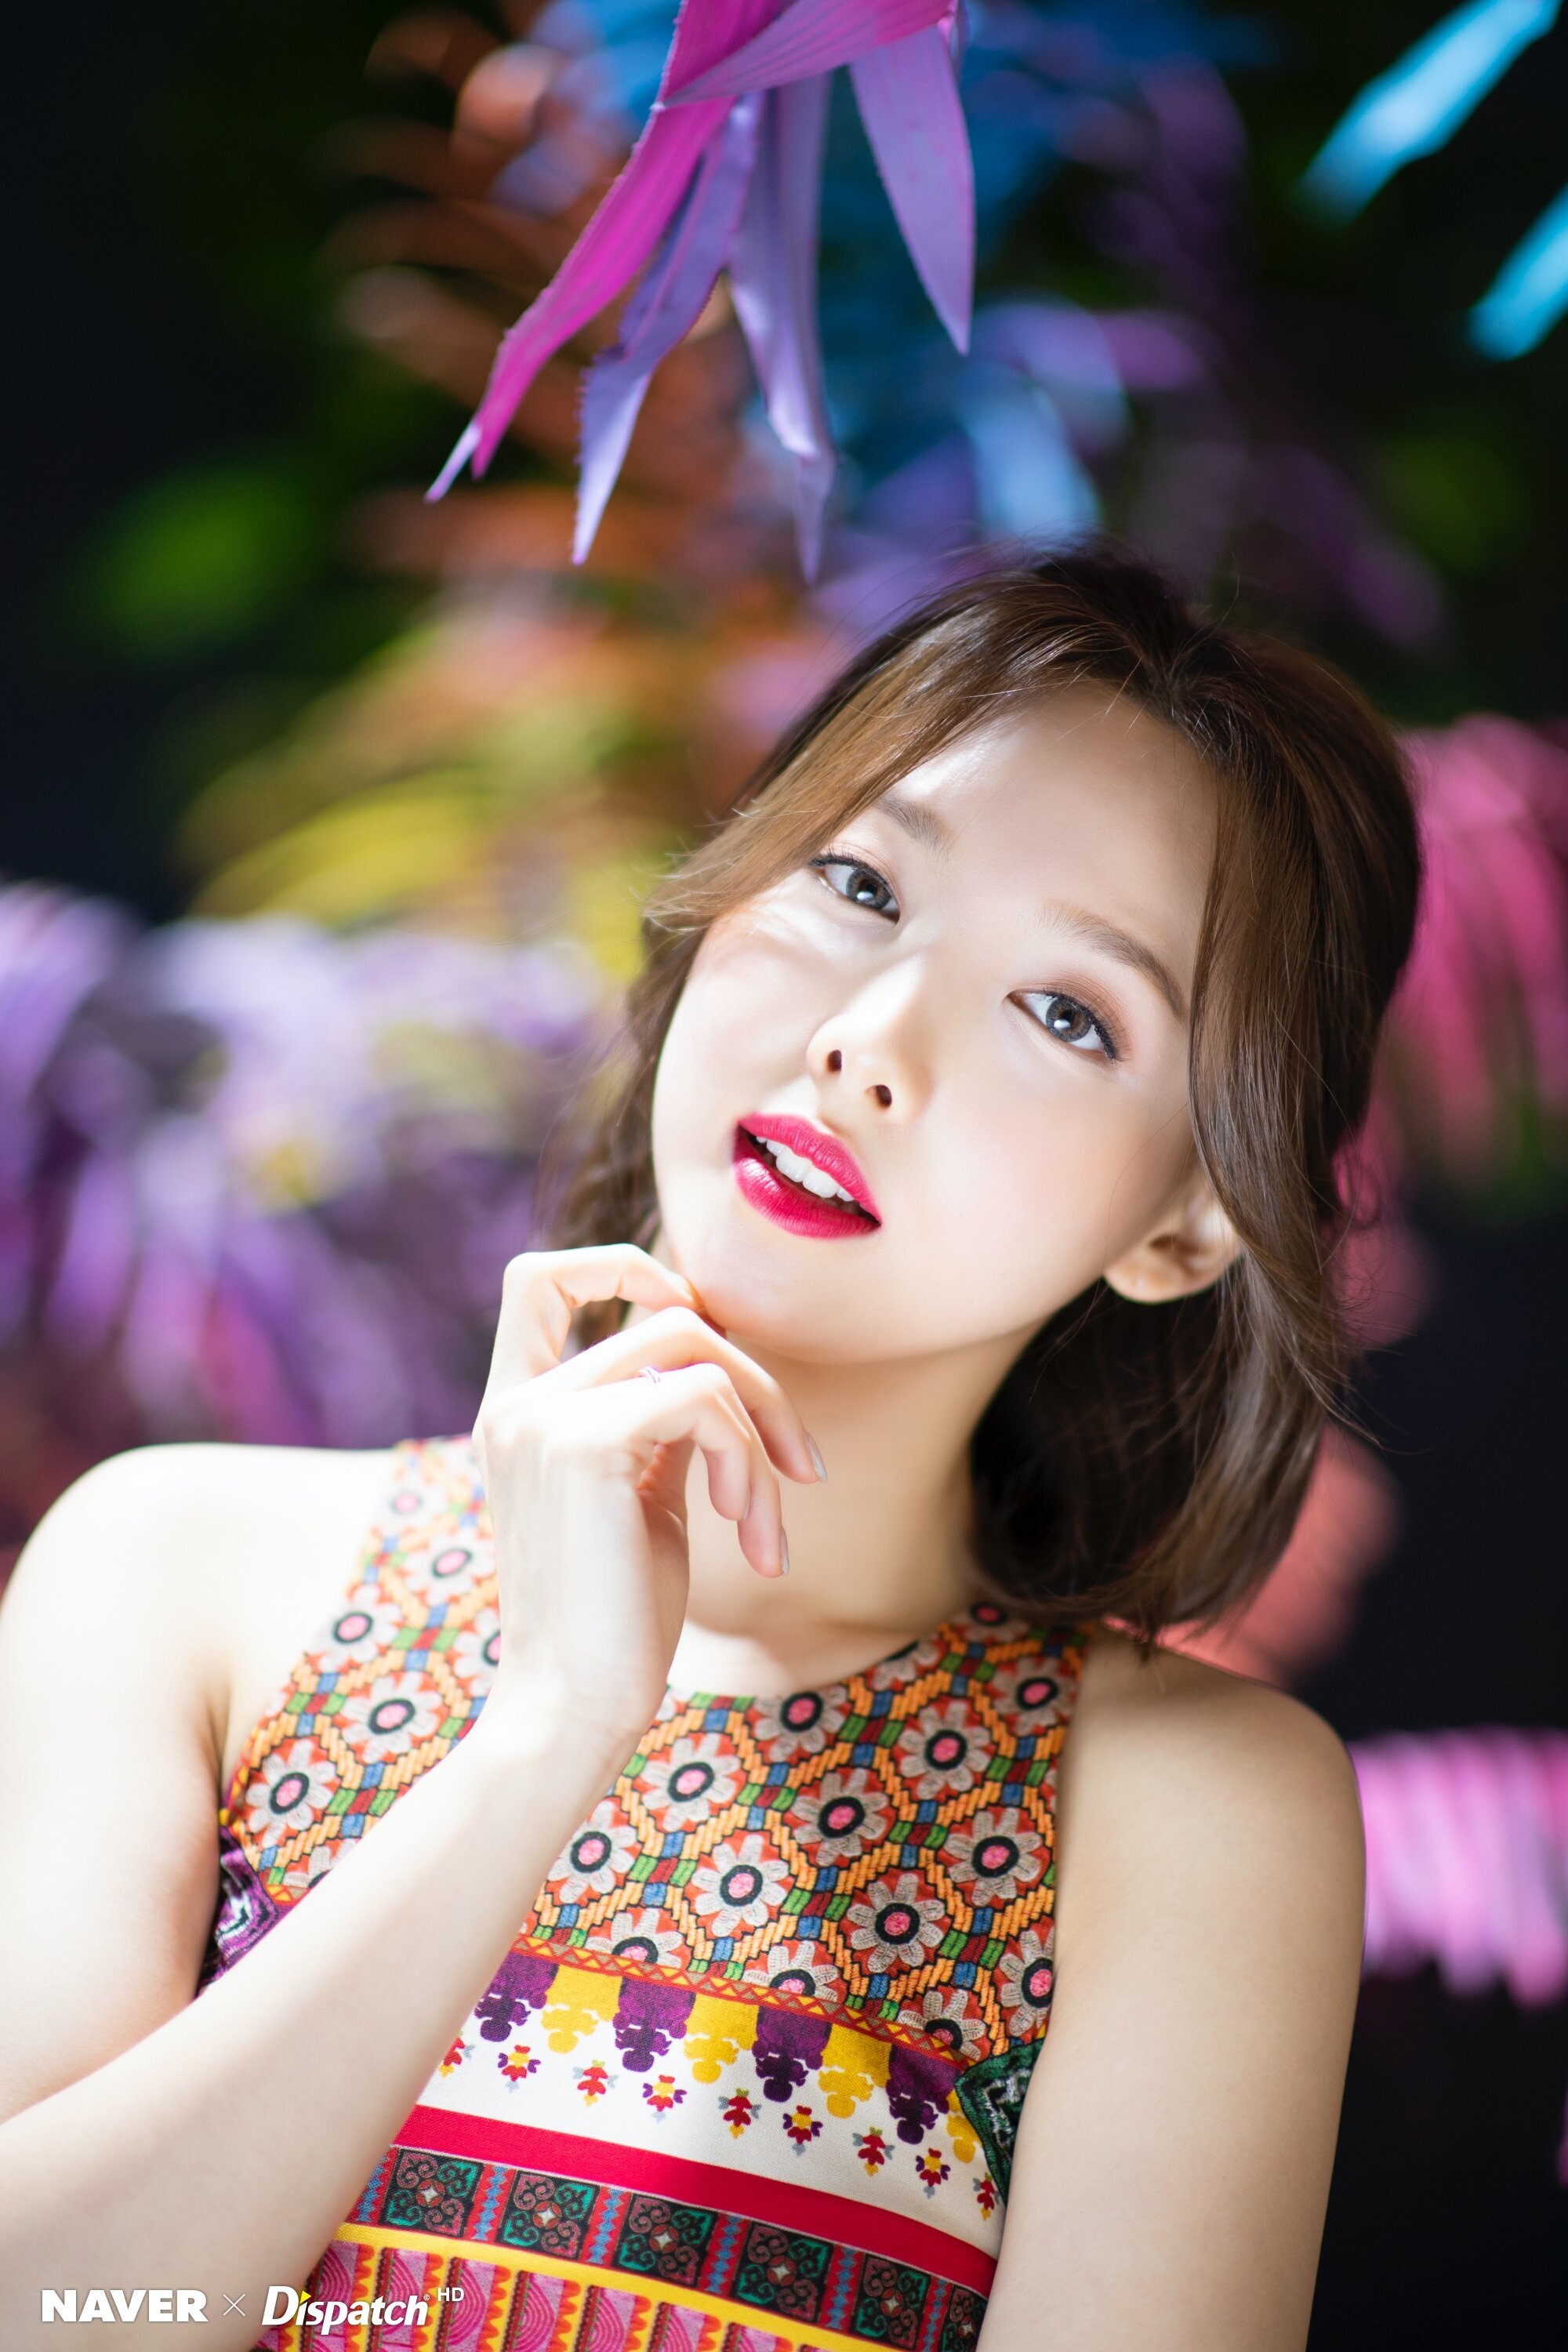 Pop Crave on X: #TWICE's #NAYEON looks amazing in new concept photos for  her debut mini album, 'IM NAYEON,' releasing June 24.   / X